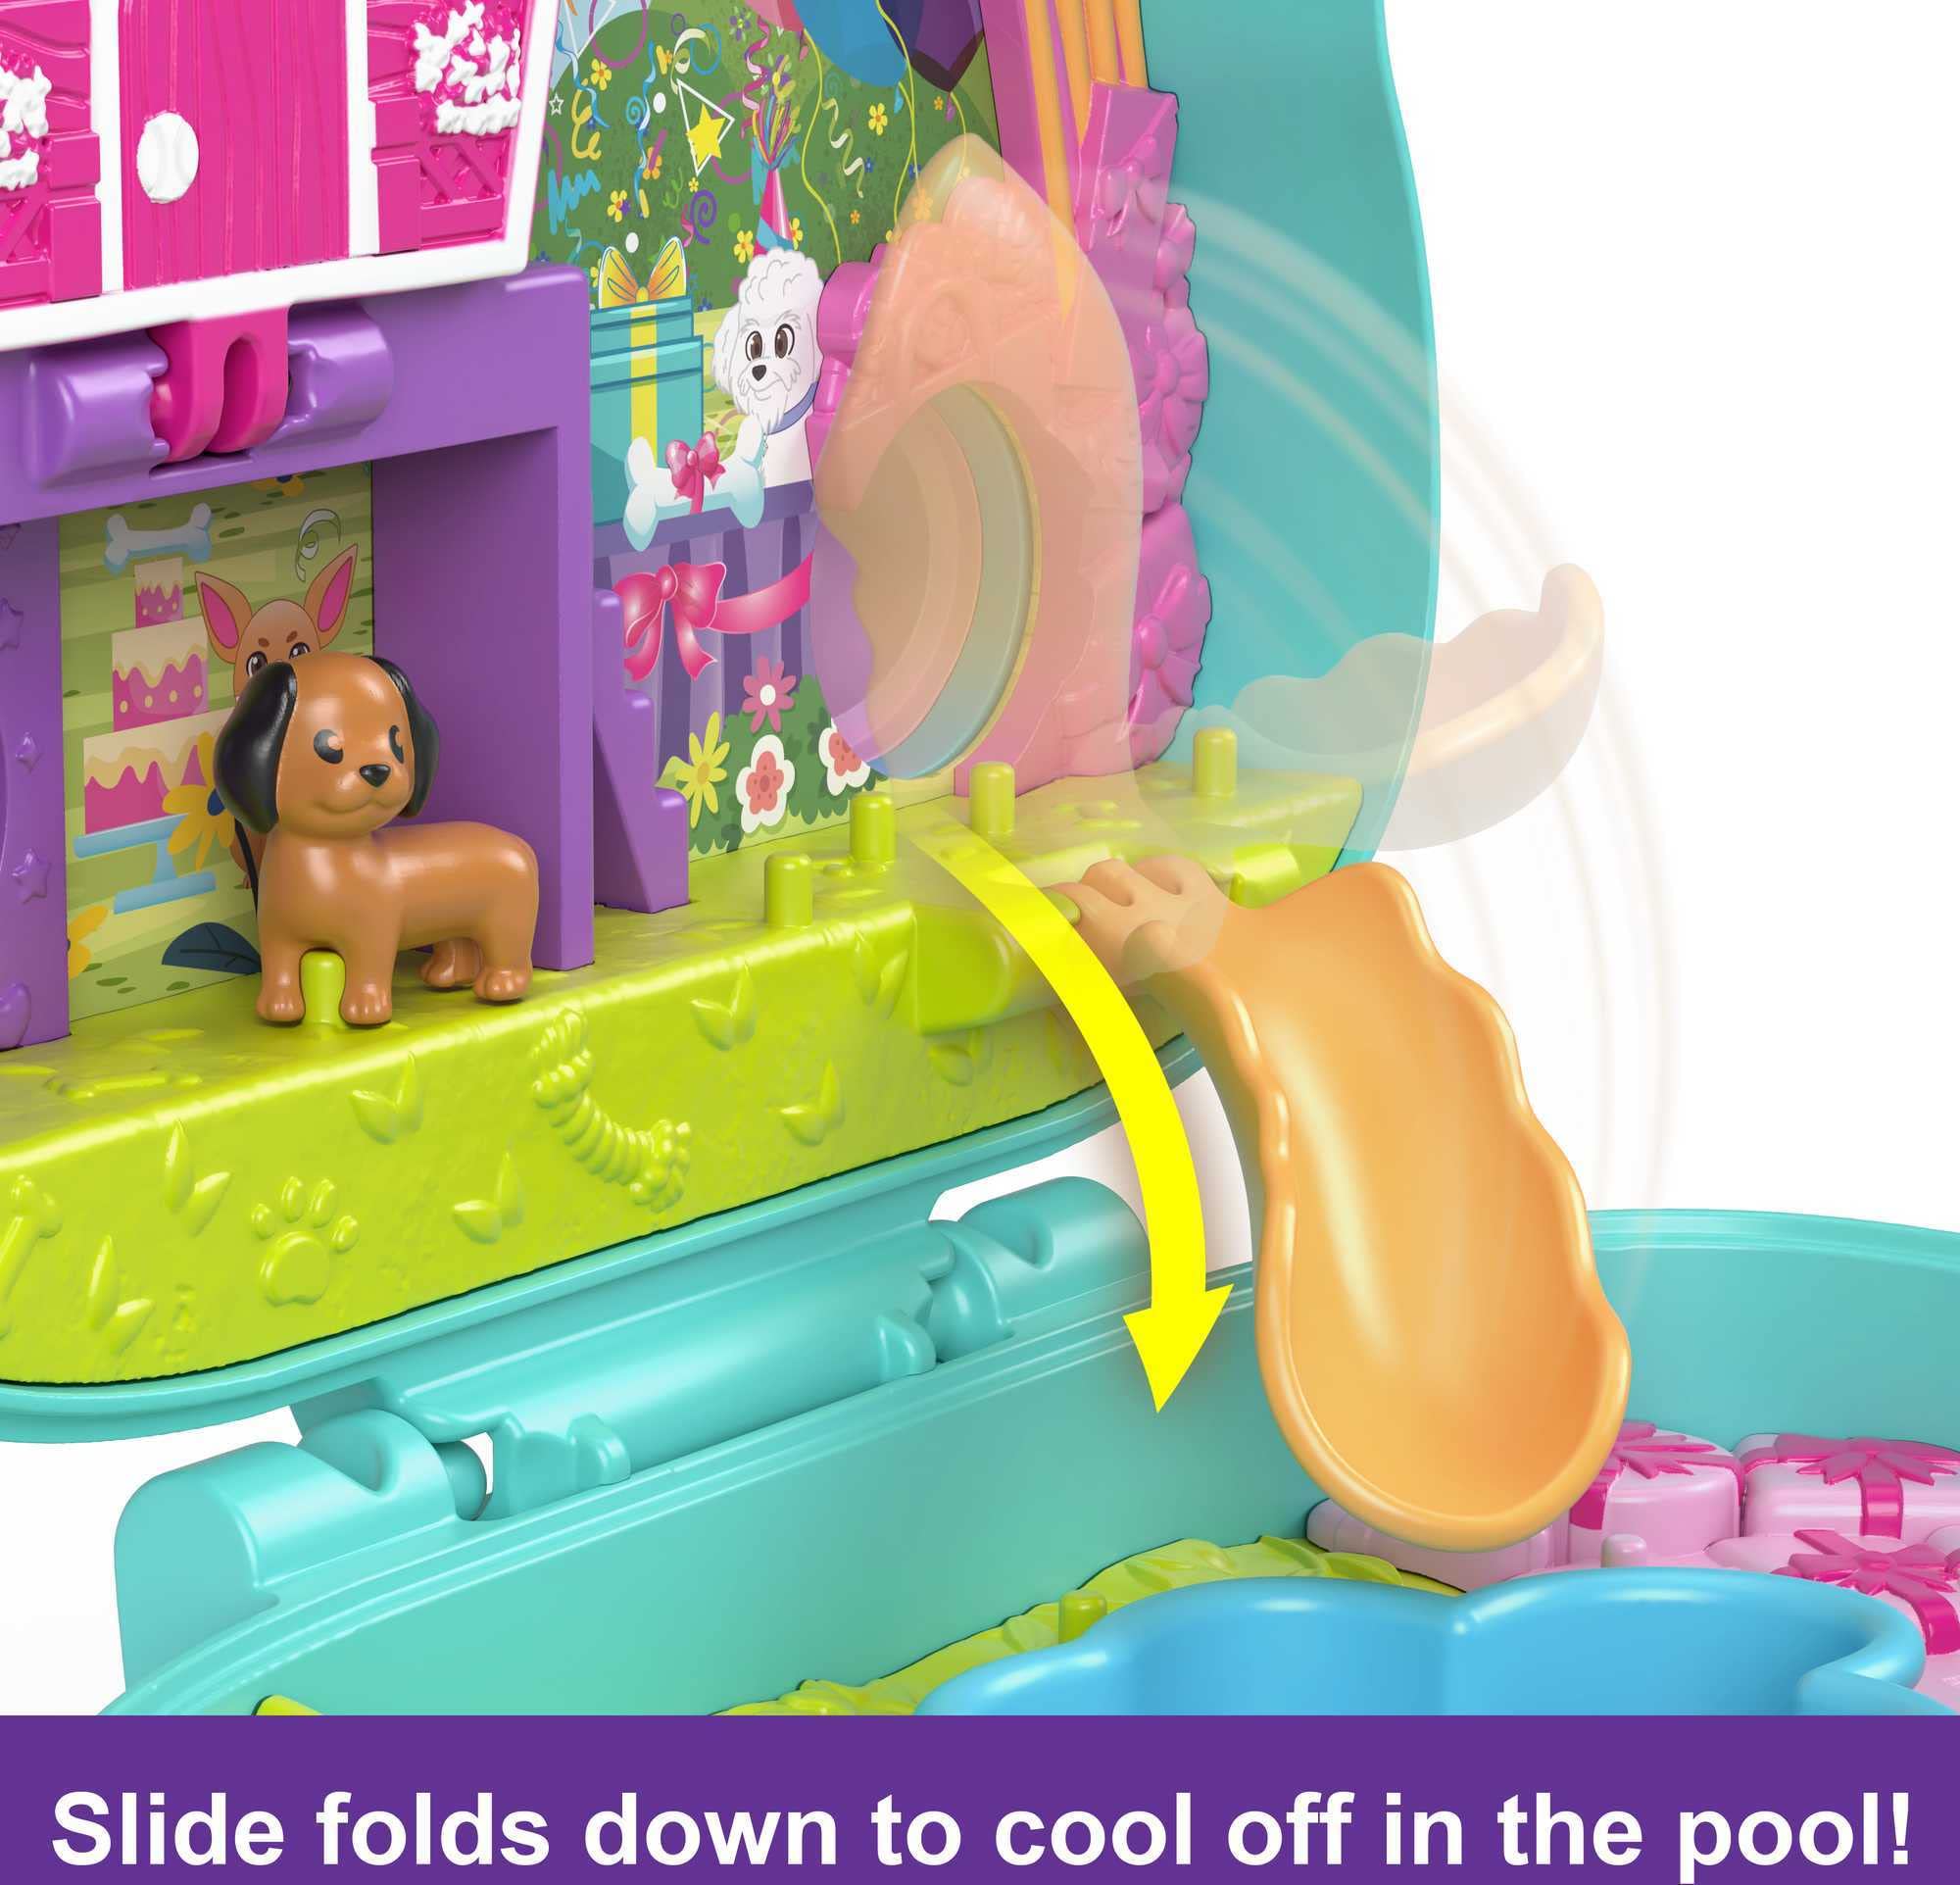 Polly Pocket Compact Playset, Doggy Birthday Bash with 2 Micro Dolls & Accessories, Travel Toys with Surprise Reveals